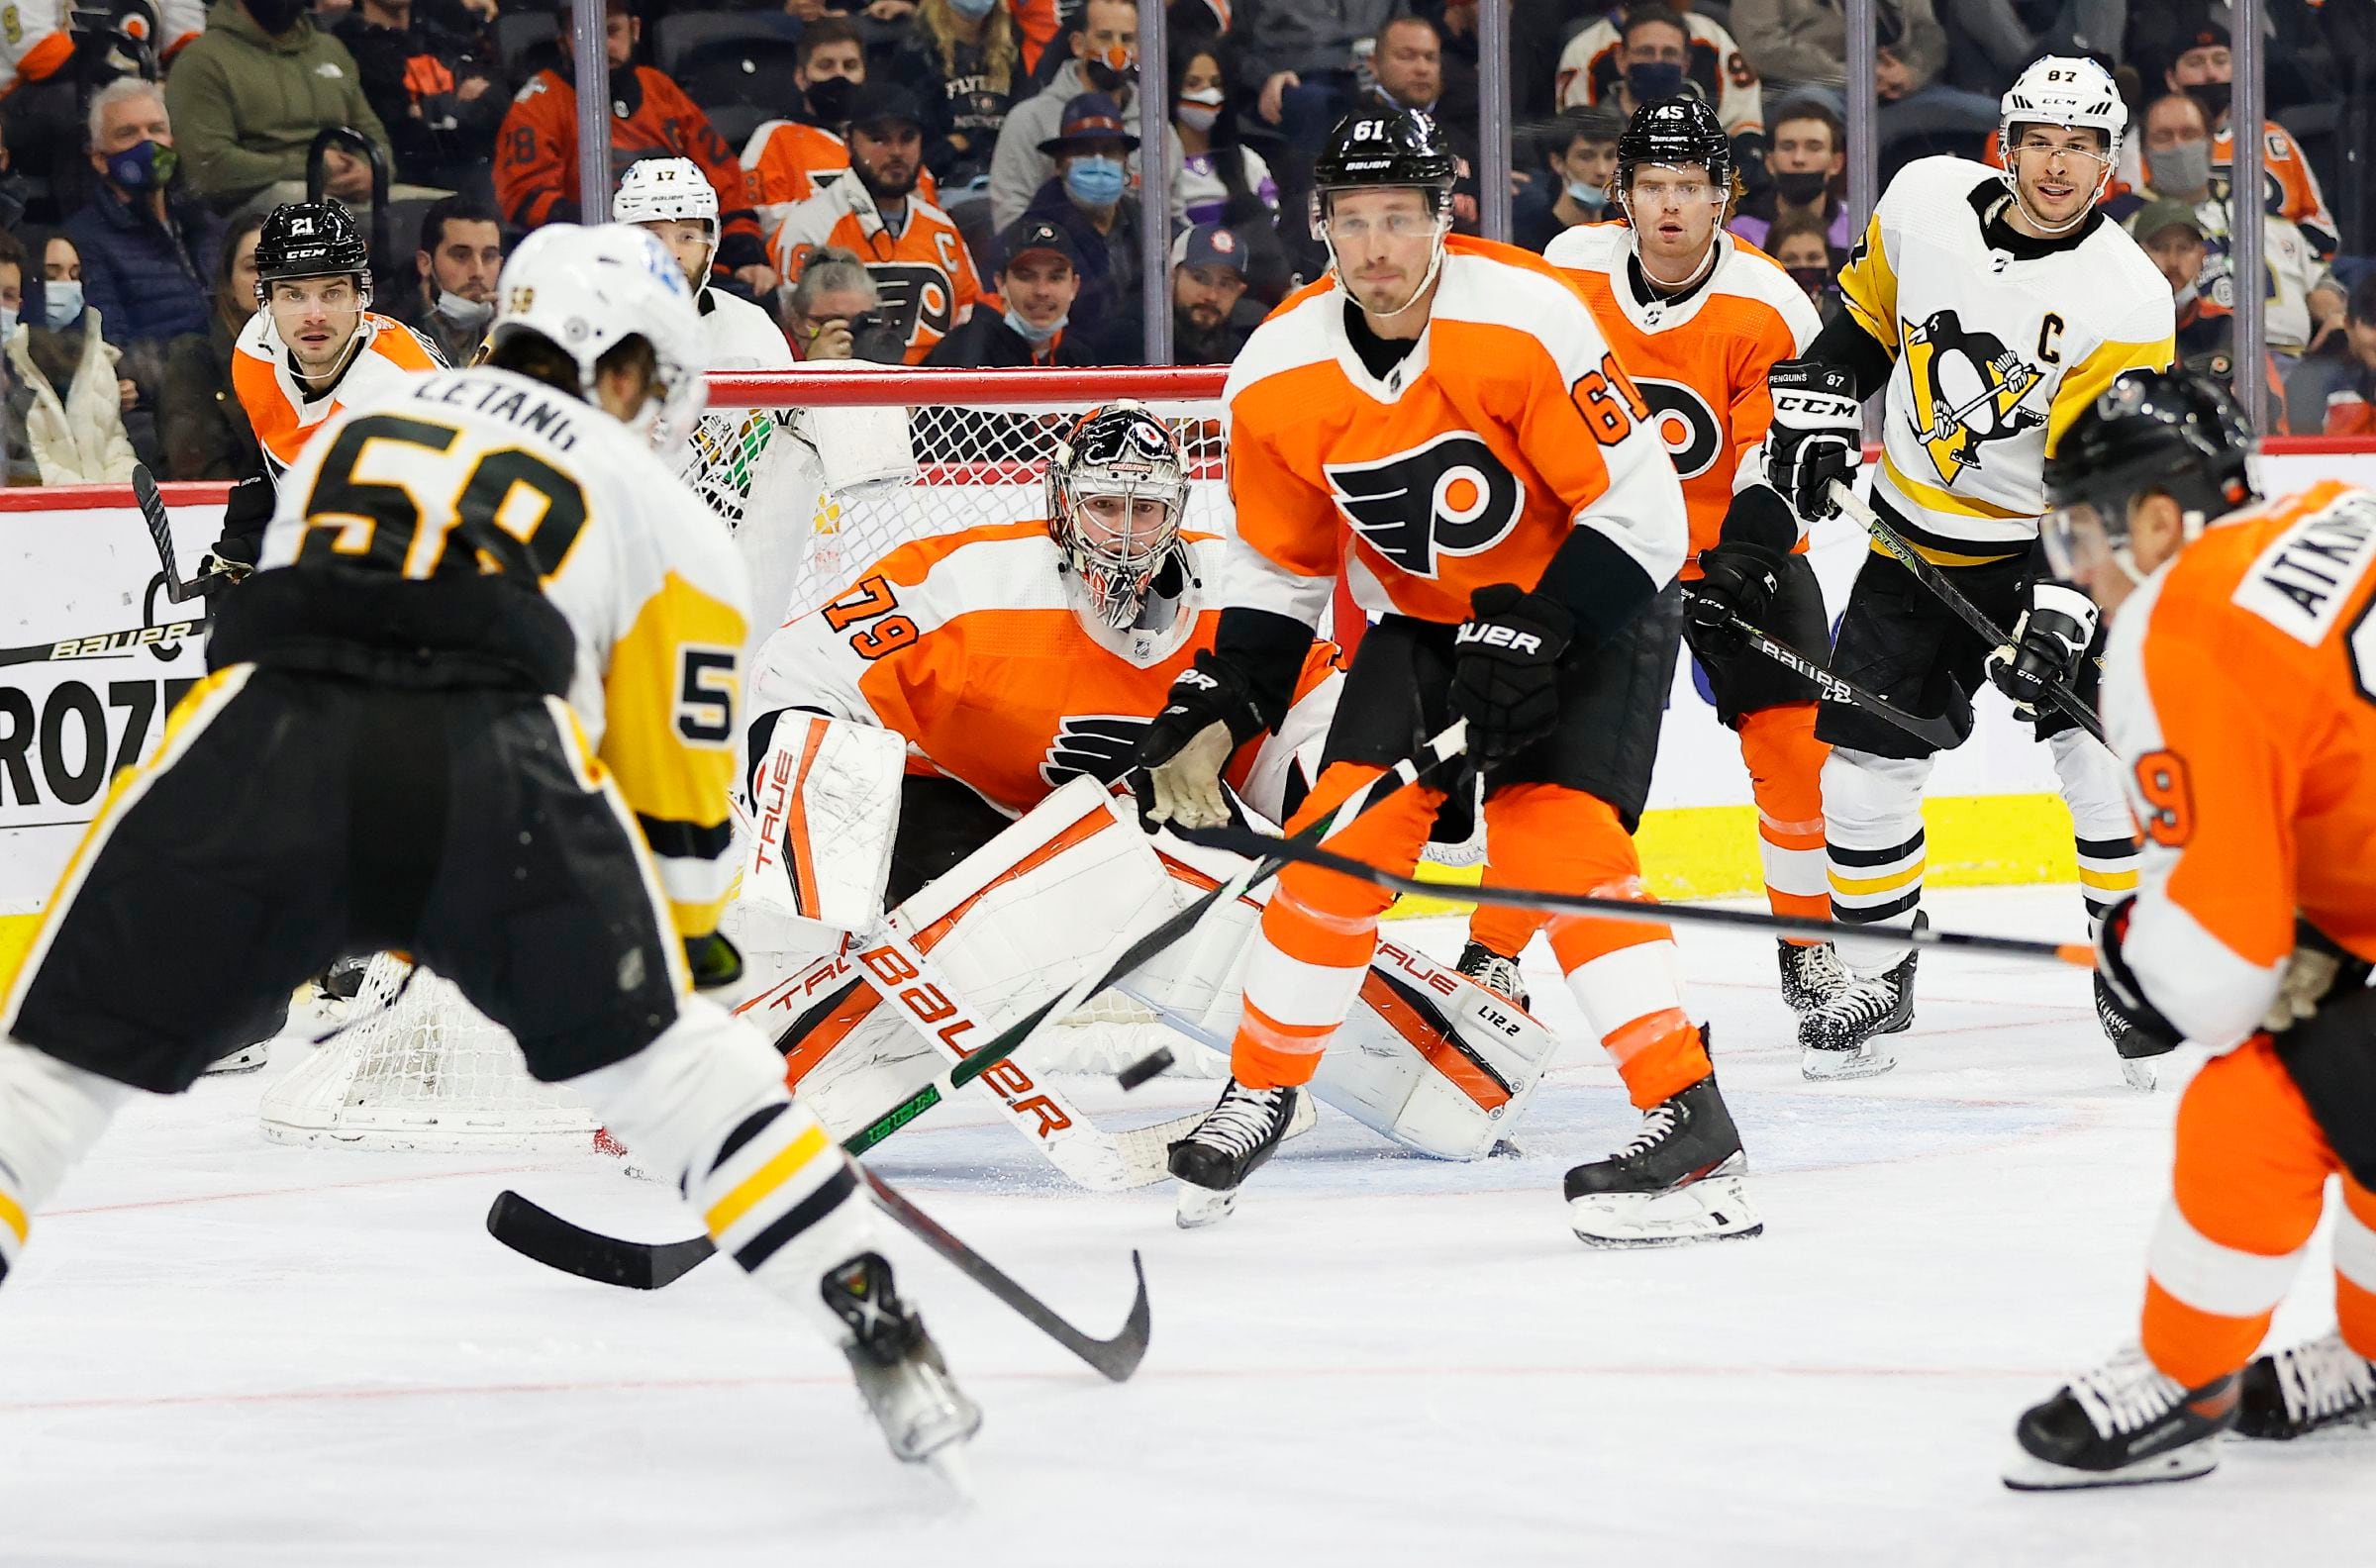 Flyers host Penguins in Black Friday matchup looking to end losing